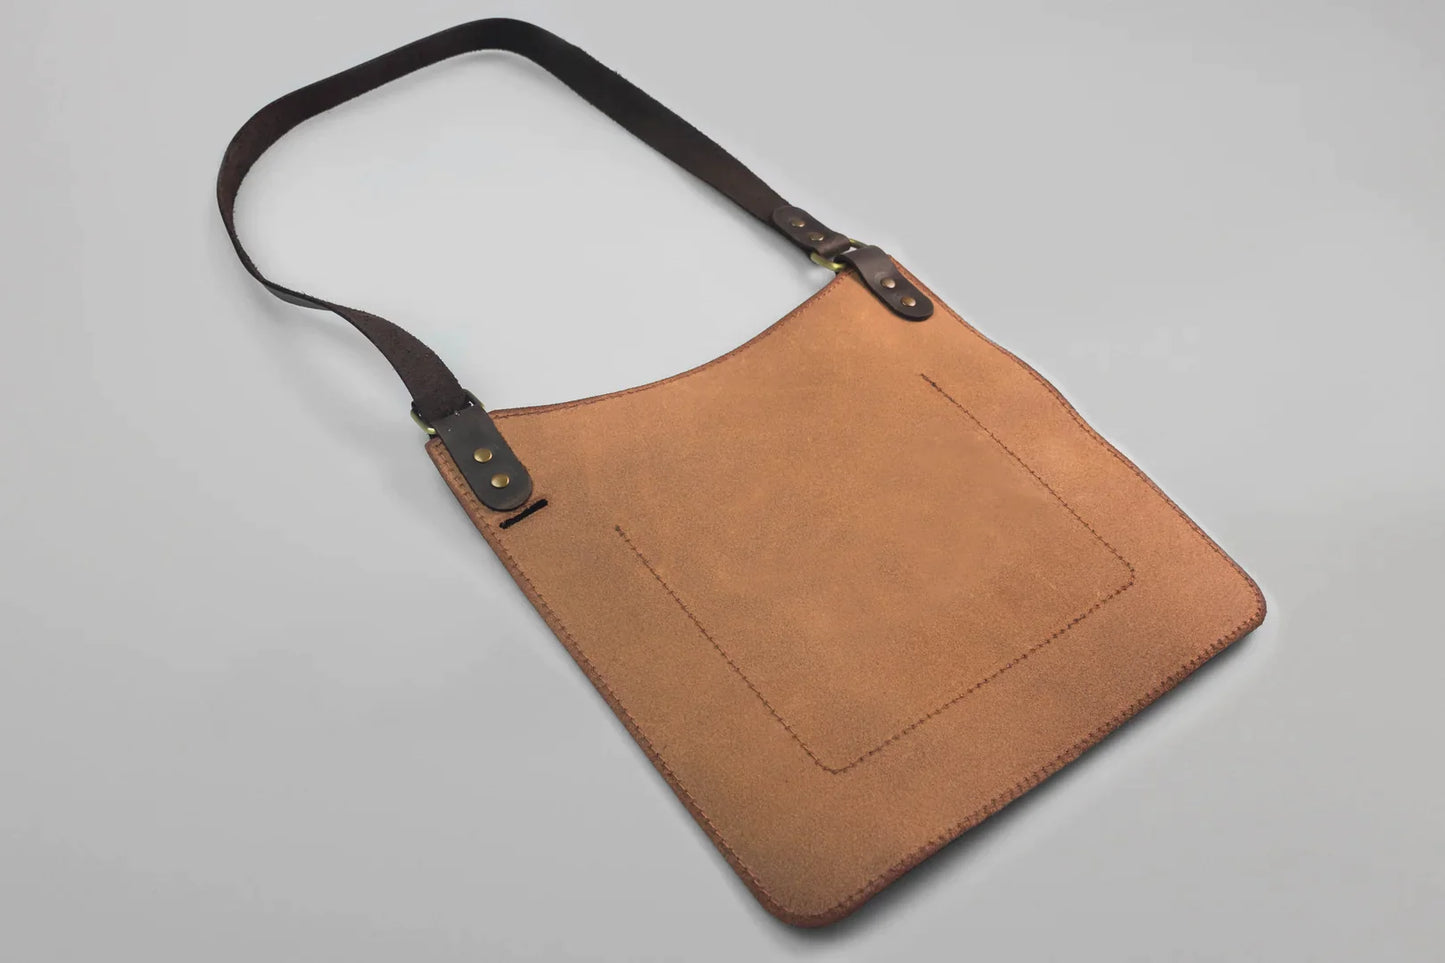 AP5 – Adjustable Leather Carving Bib for Chest Protection